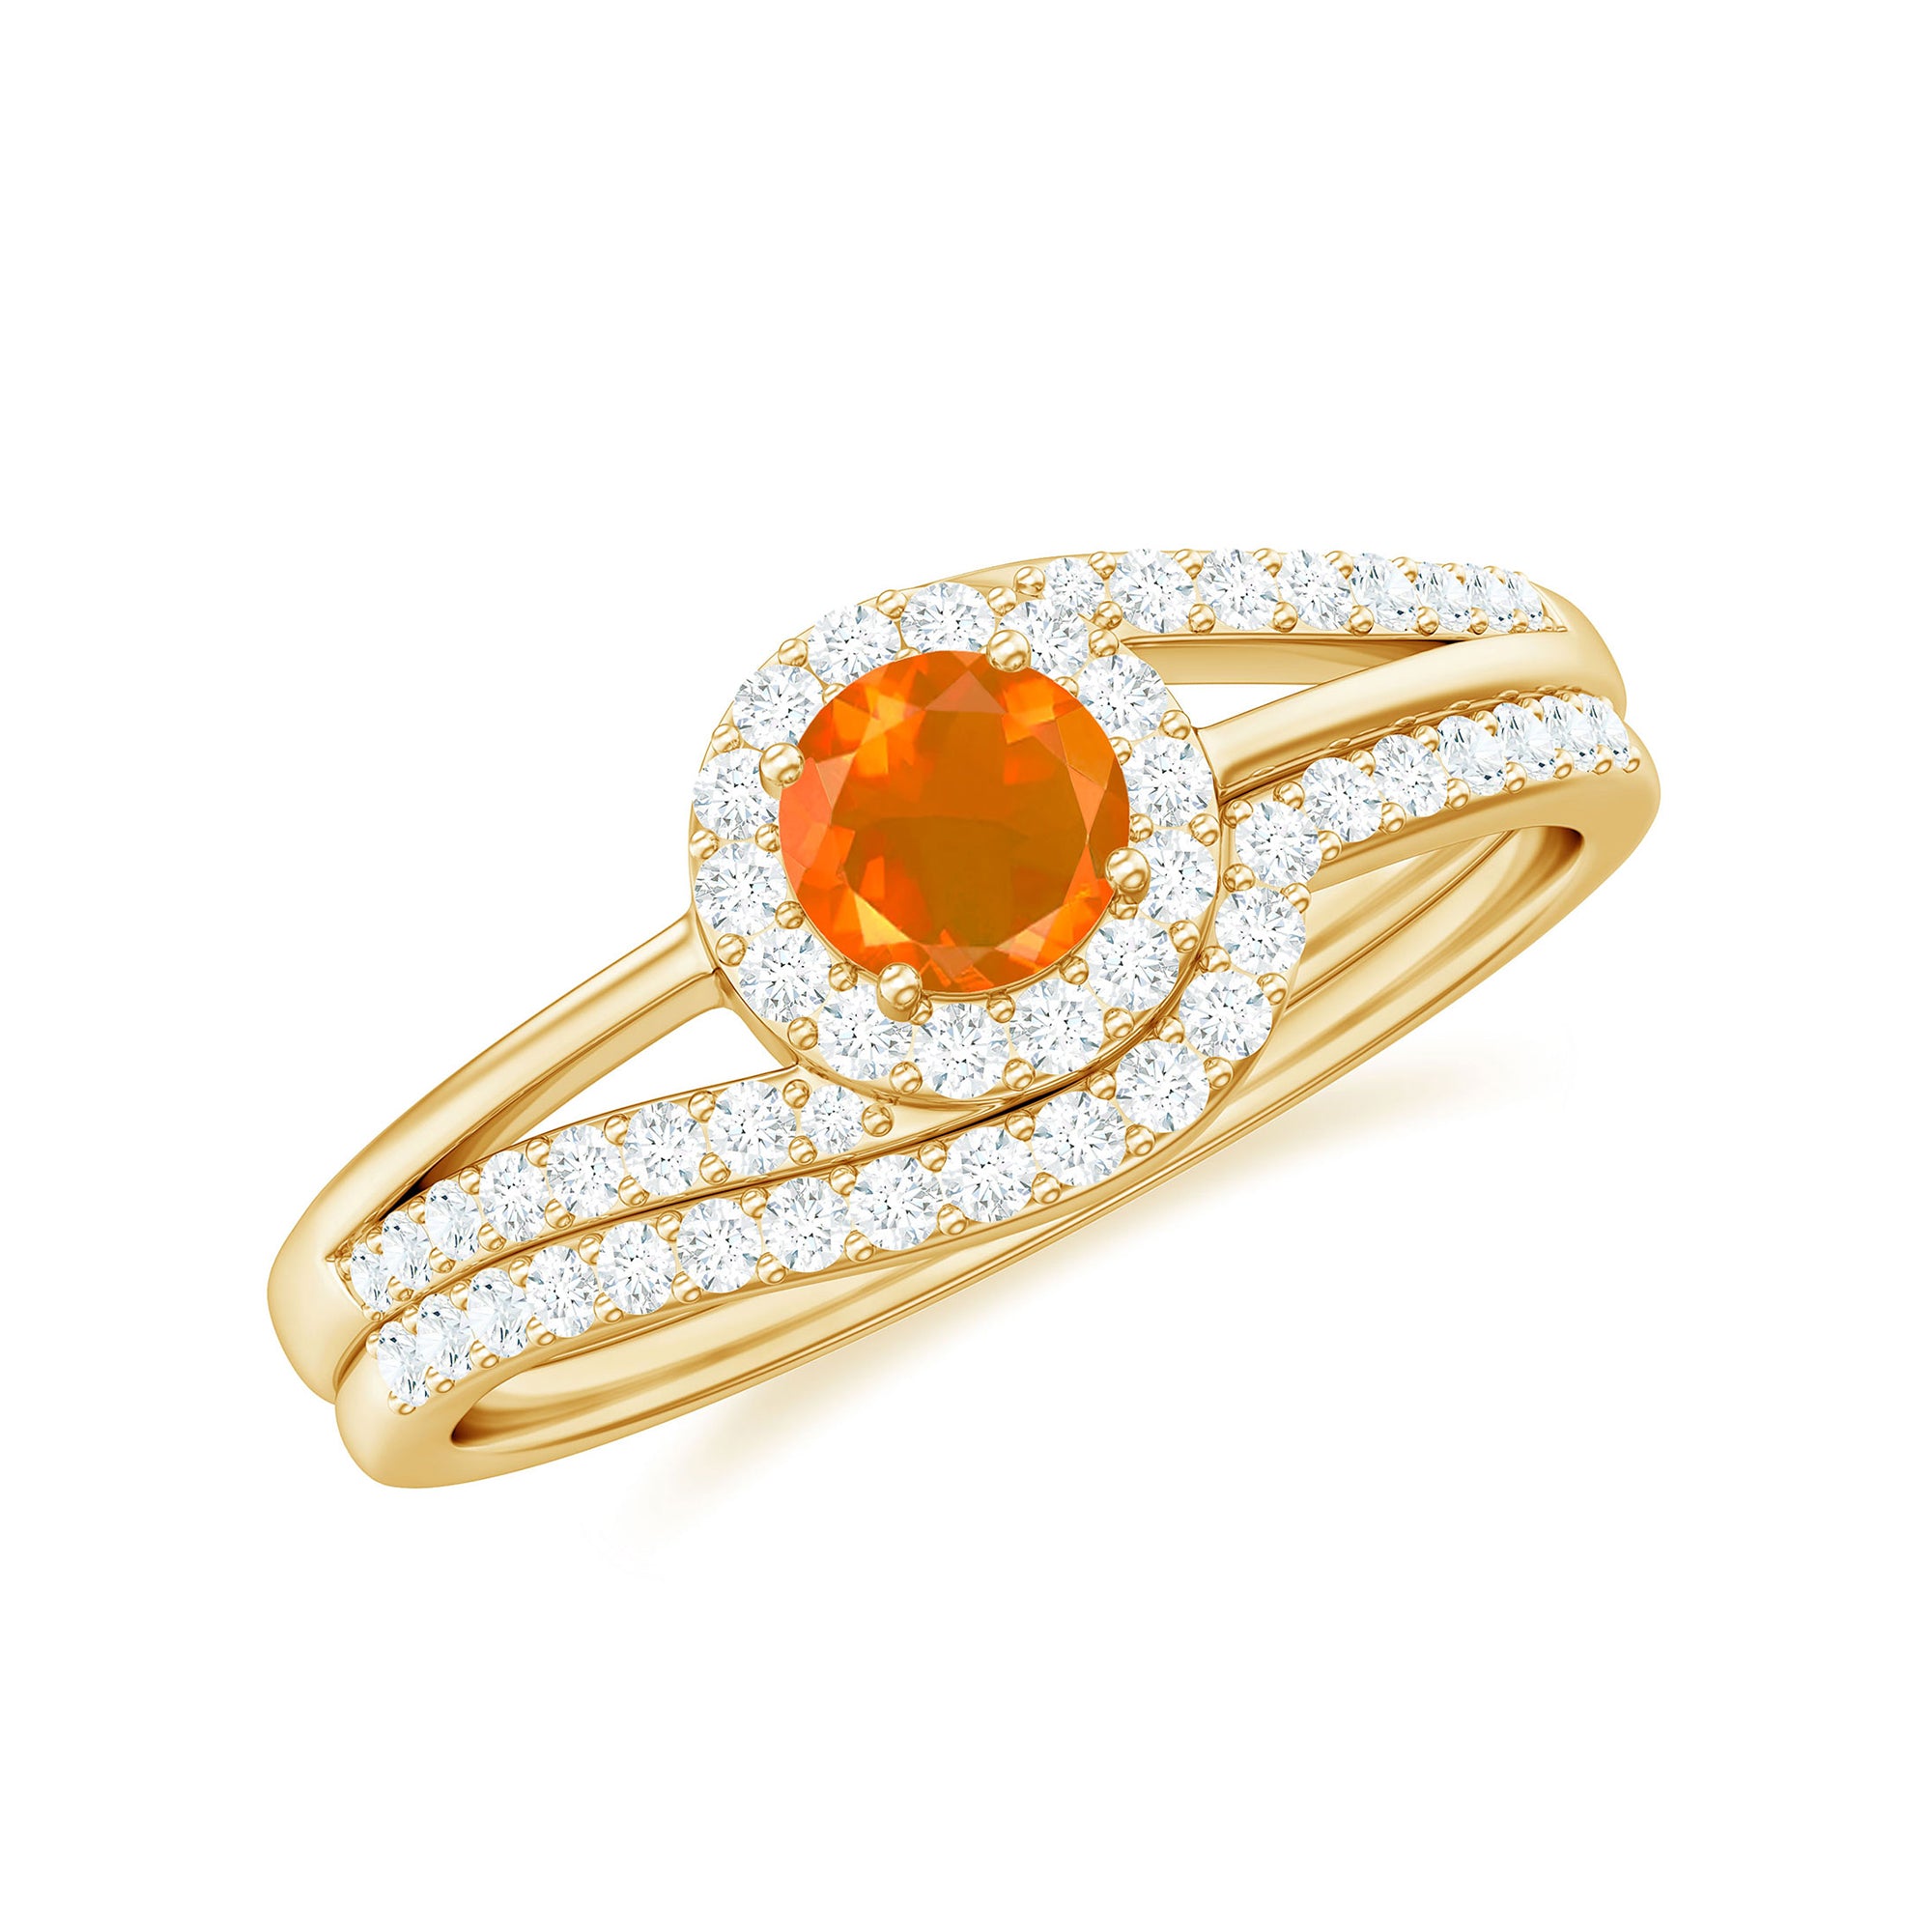 0.75 CT Minimal Fire Opal Engagement Ring with Diamond Enhancer Fire Opal - ( AAA ) - Quality - Rosec Jewels